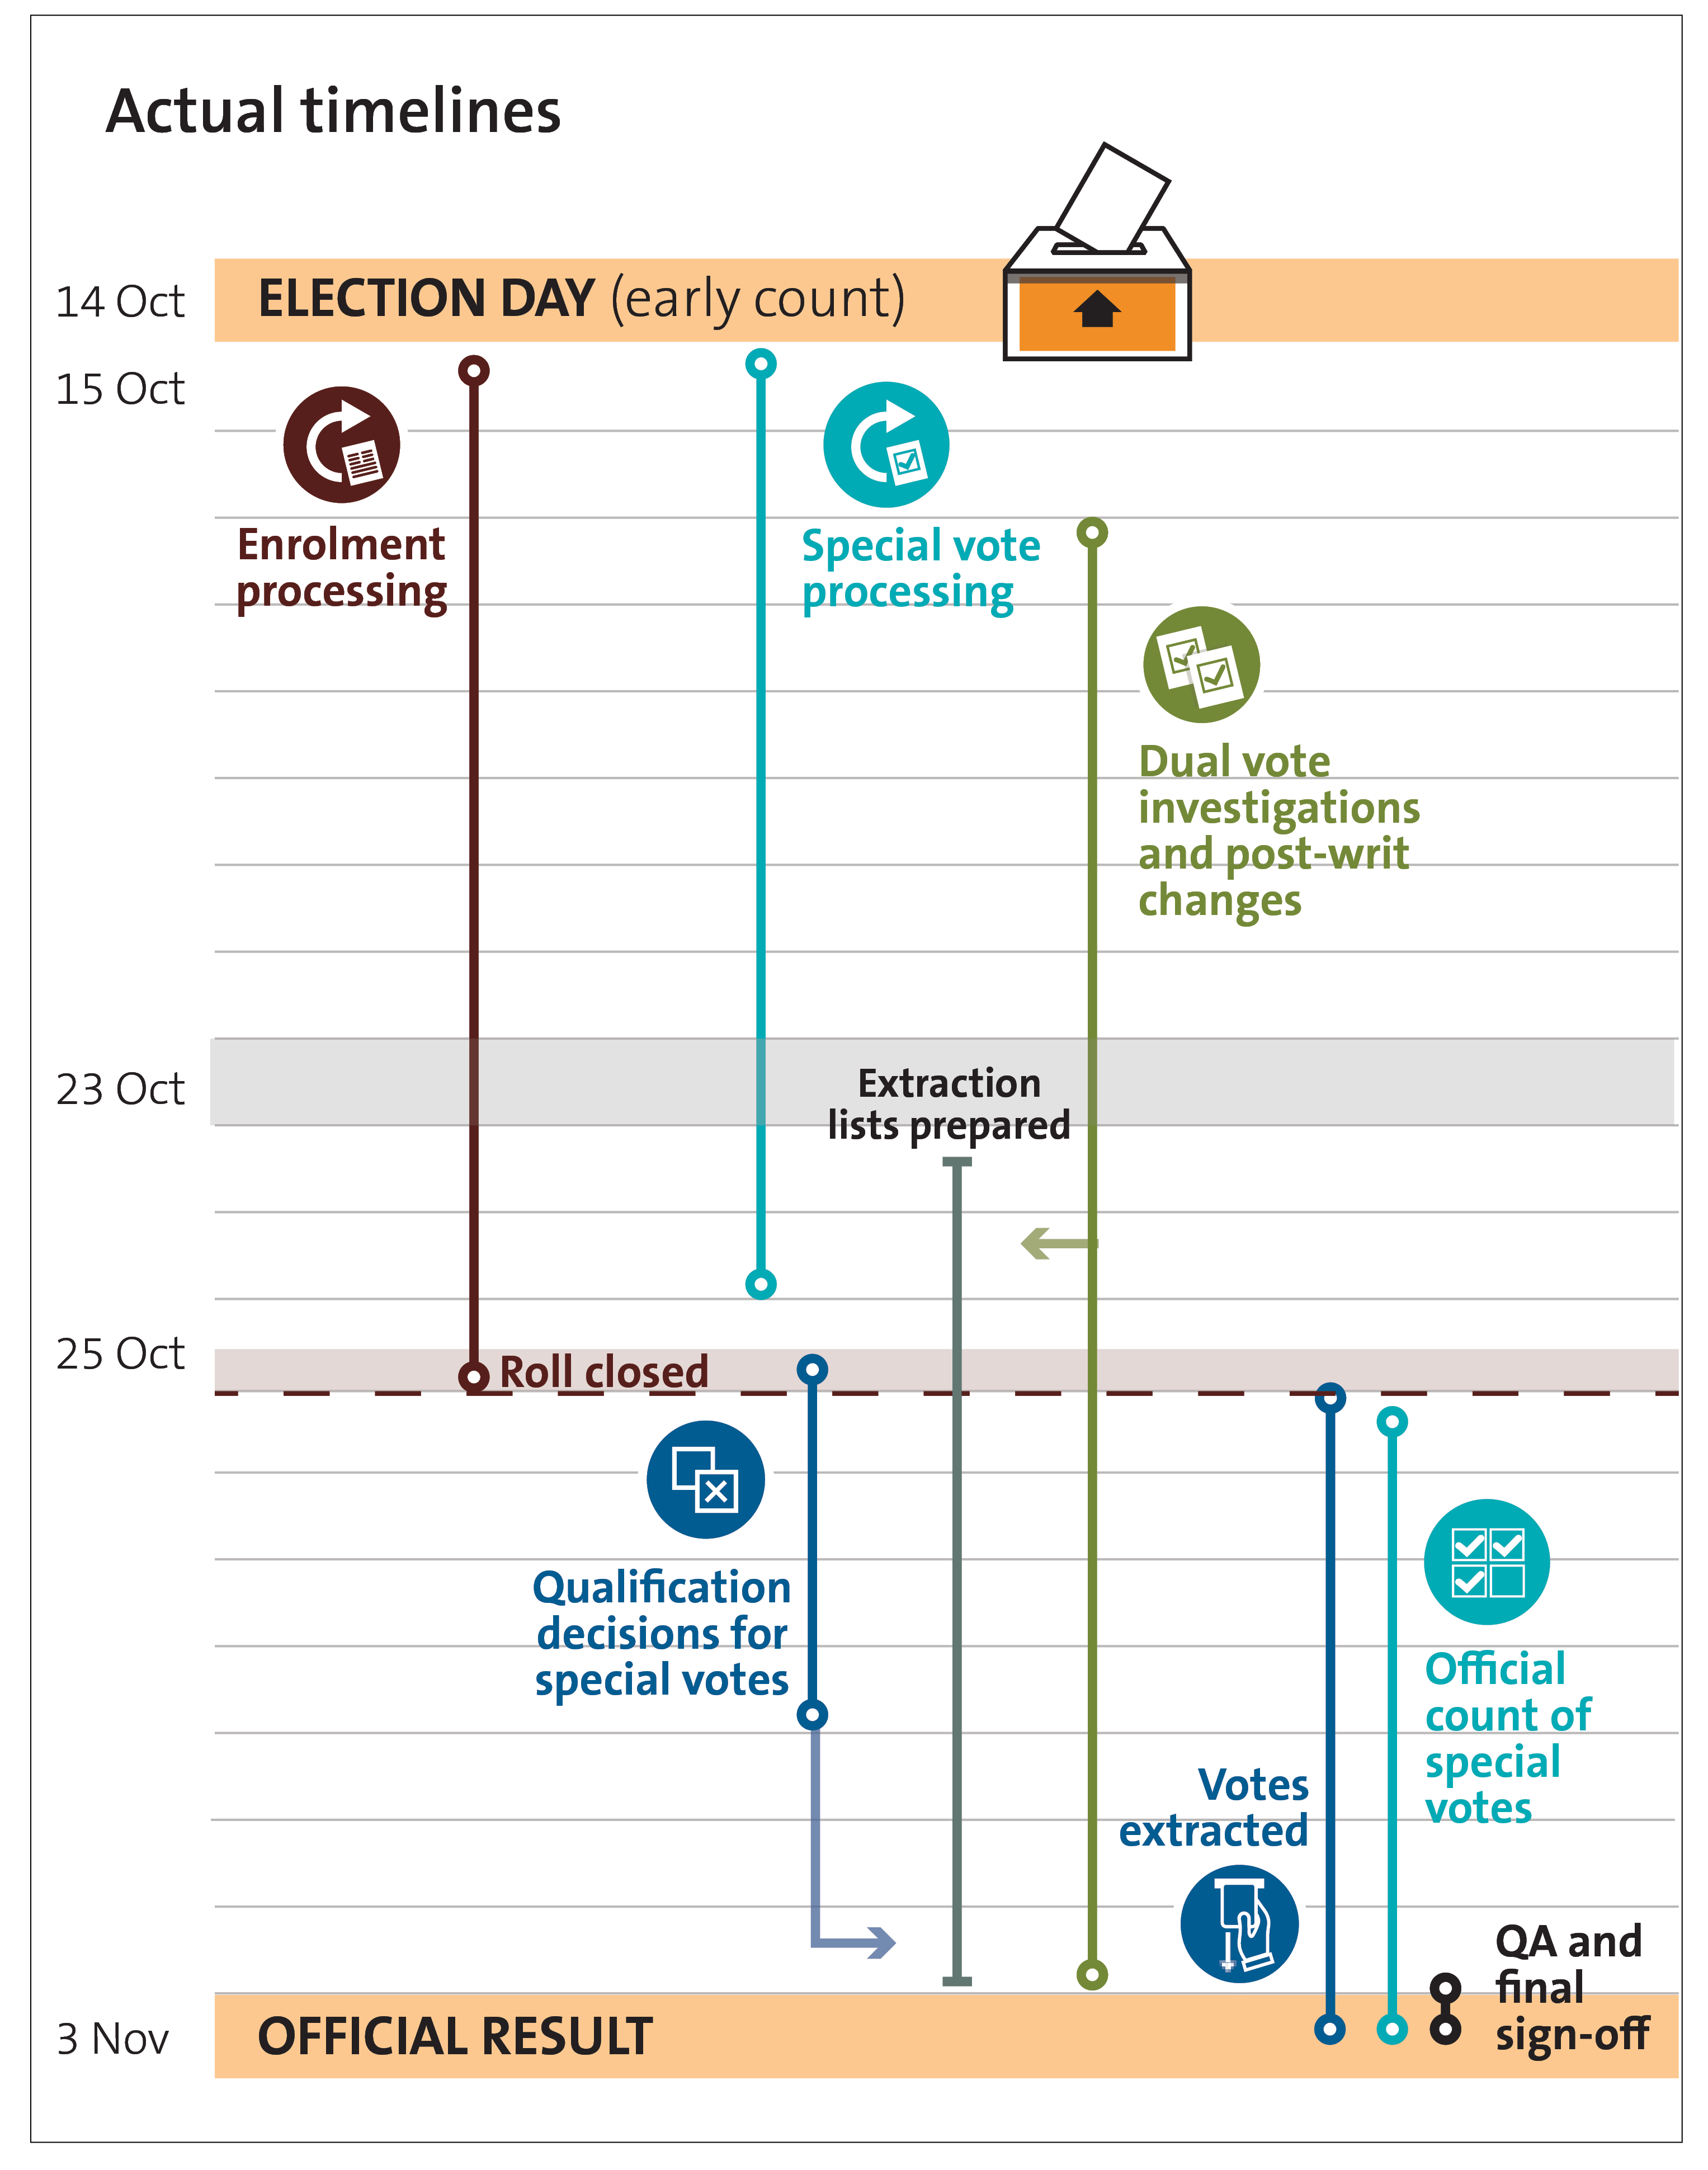 Figure 2 - actual timelines for the official count for the 2023 General Election